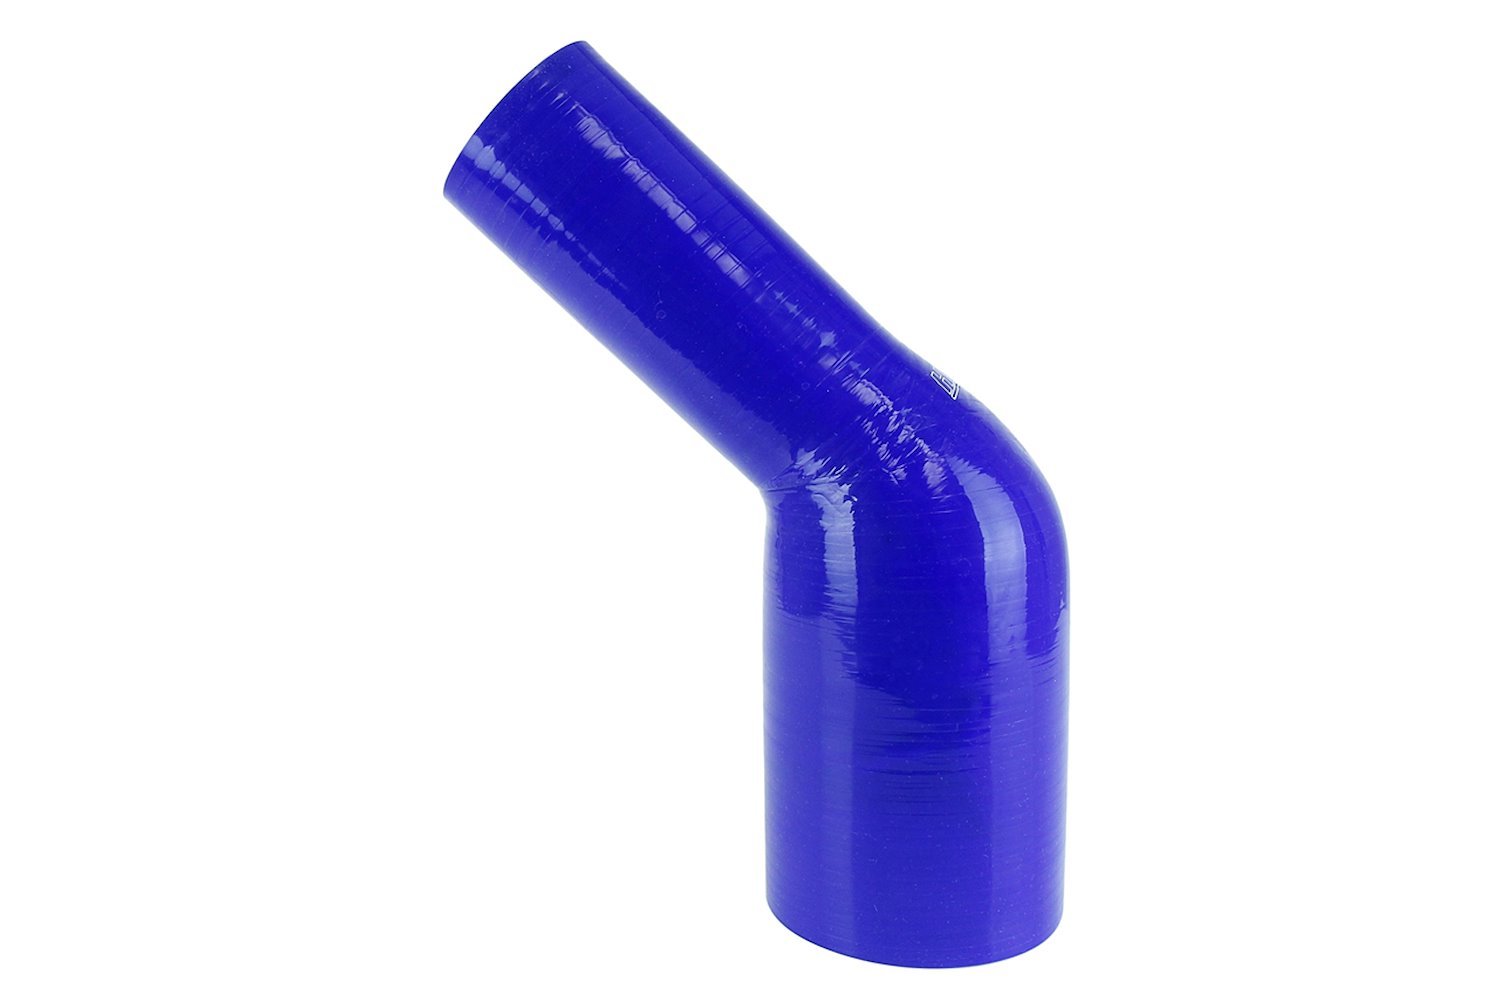 HTSER45-225-250-BLUE Silicone 45-Degree Elbow Hose, High-Temp 4-Ply Reinforced, 2-1/4 in. - 2-1/2 in. ID, Blue